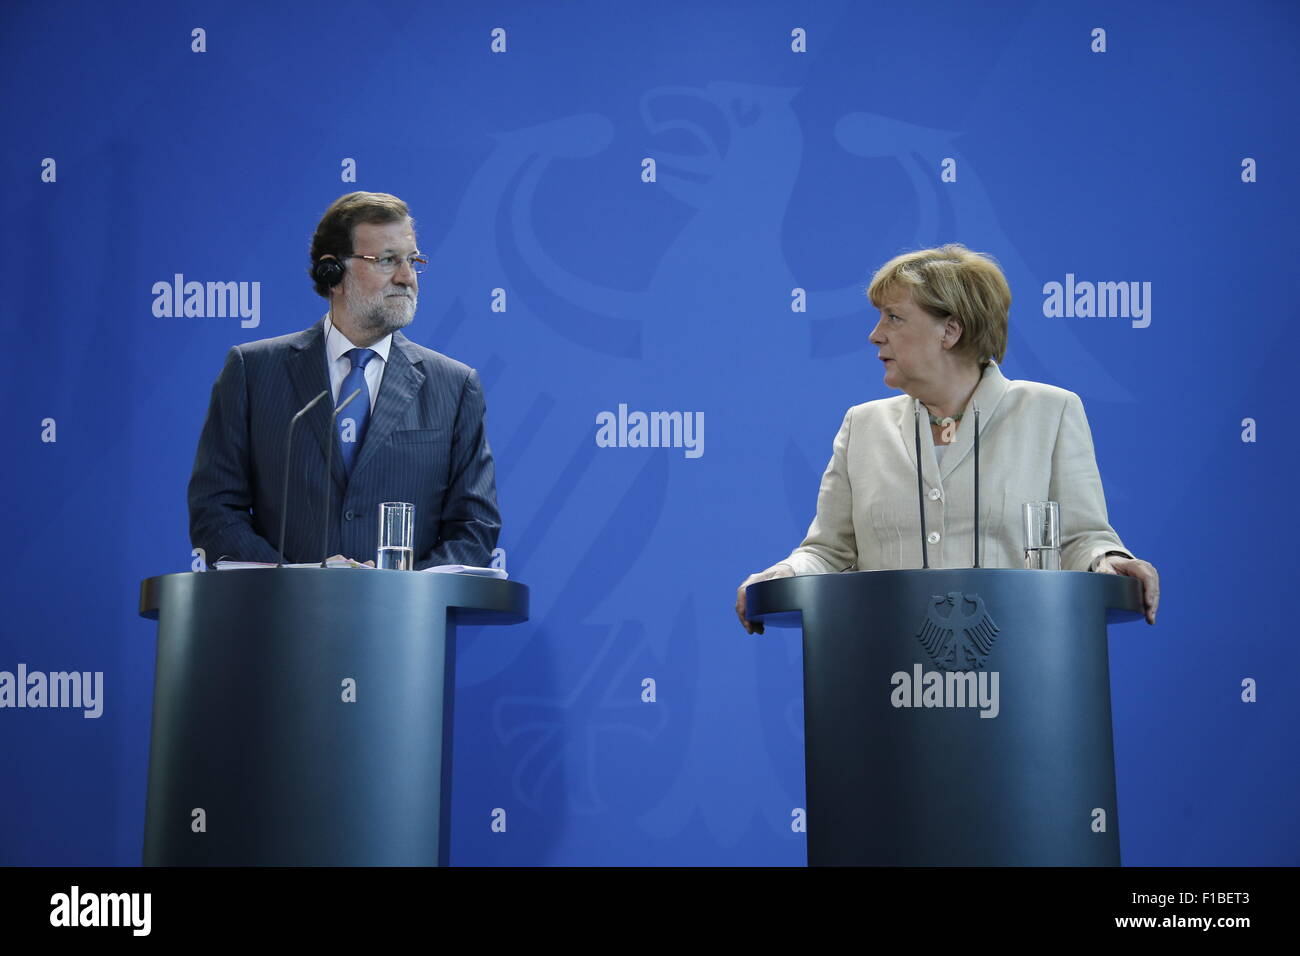 Berlin, Germany. 01st Sep, 2015. German Chancellor Angela Merkel together with Spanish Prime Minster Mariano Rajoy give a joint press conference at the German Chancellery in Berlin, German on september 01, 2015. / Picture:  Mariano Rajoy, Prime Minister of Spain, and Angela Merkel, German Chancellor. Credit:  Reynaldo Chaib Paganelli/Alamy Live News Stock Photo